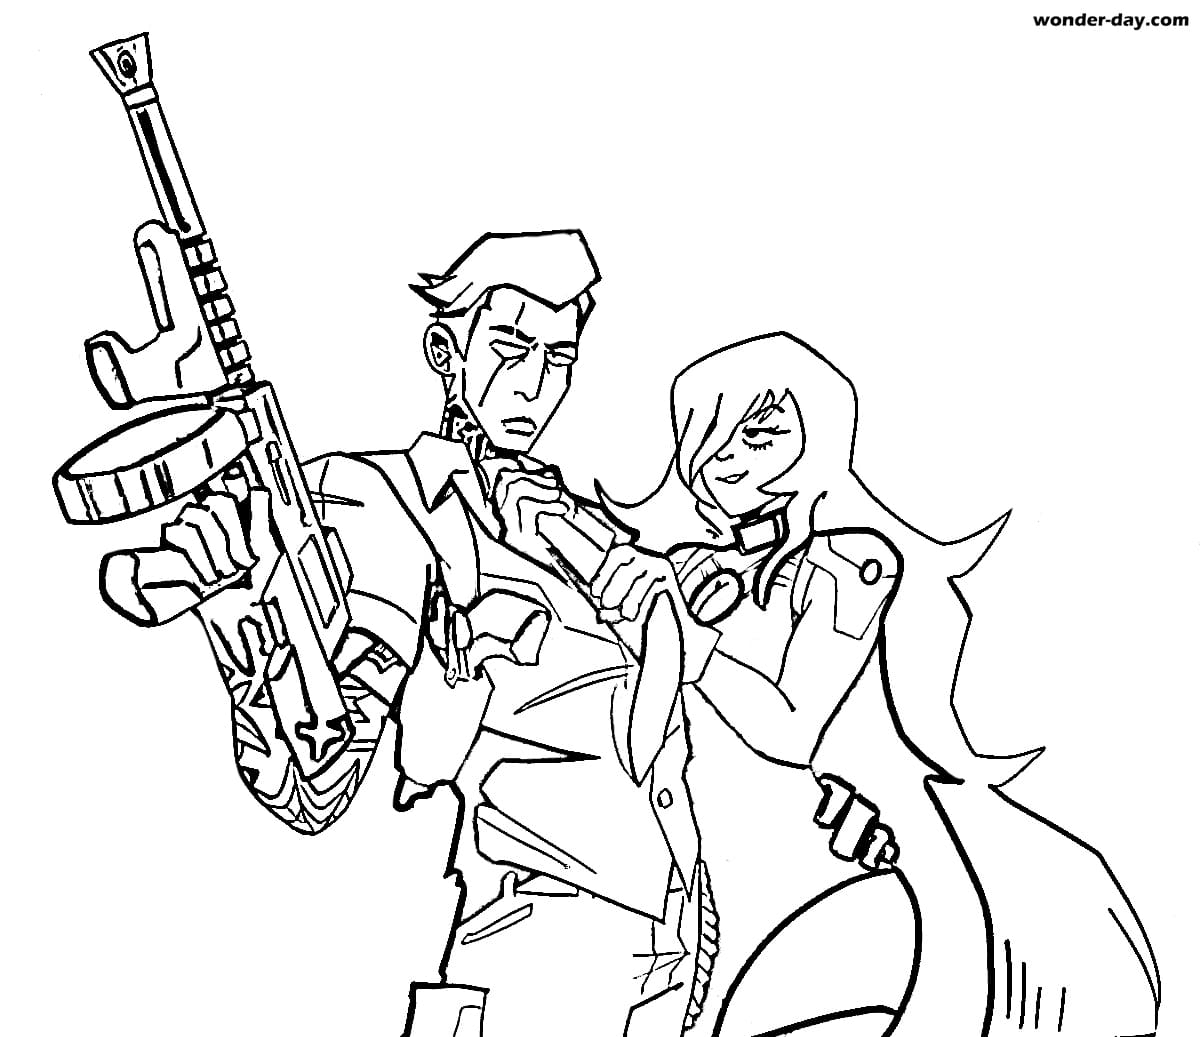 Midas Fortnite Coloring Pages Print For Free WONDER DAY Coloring 